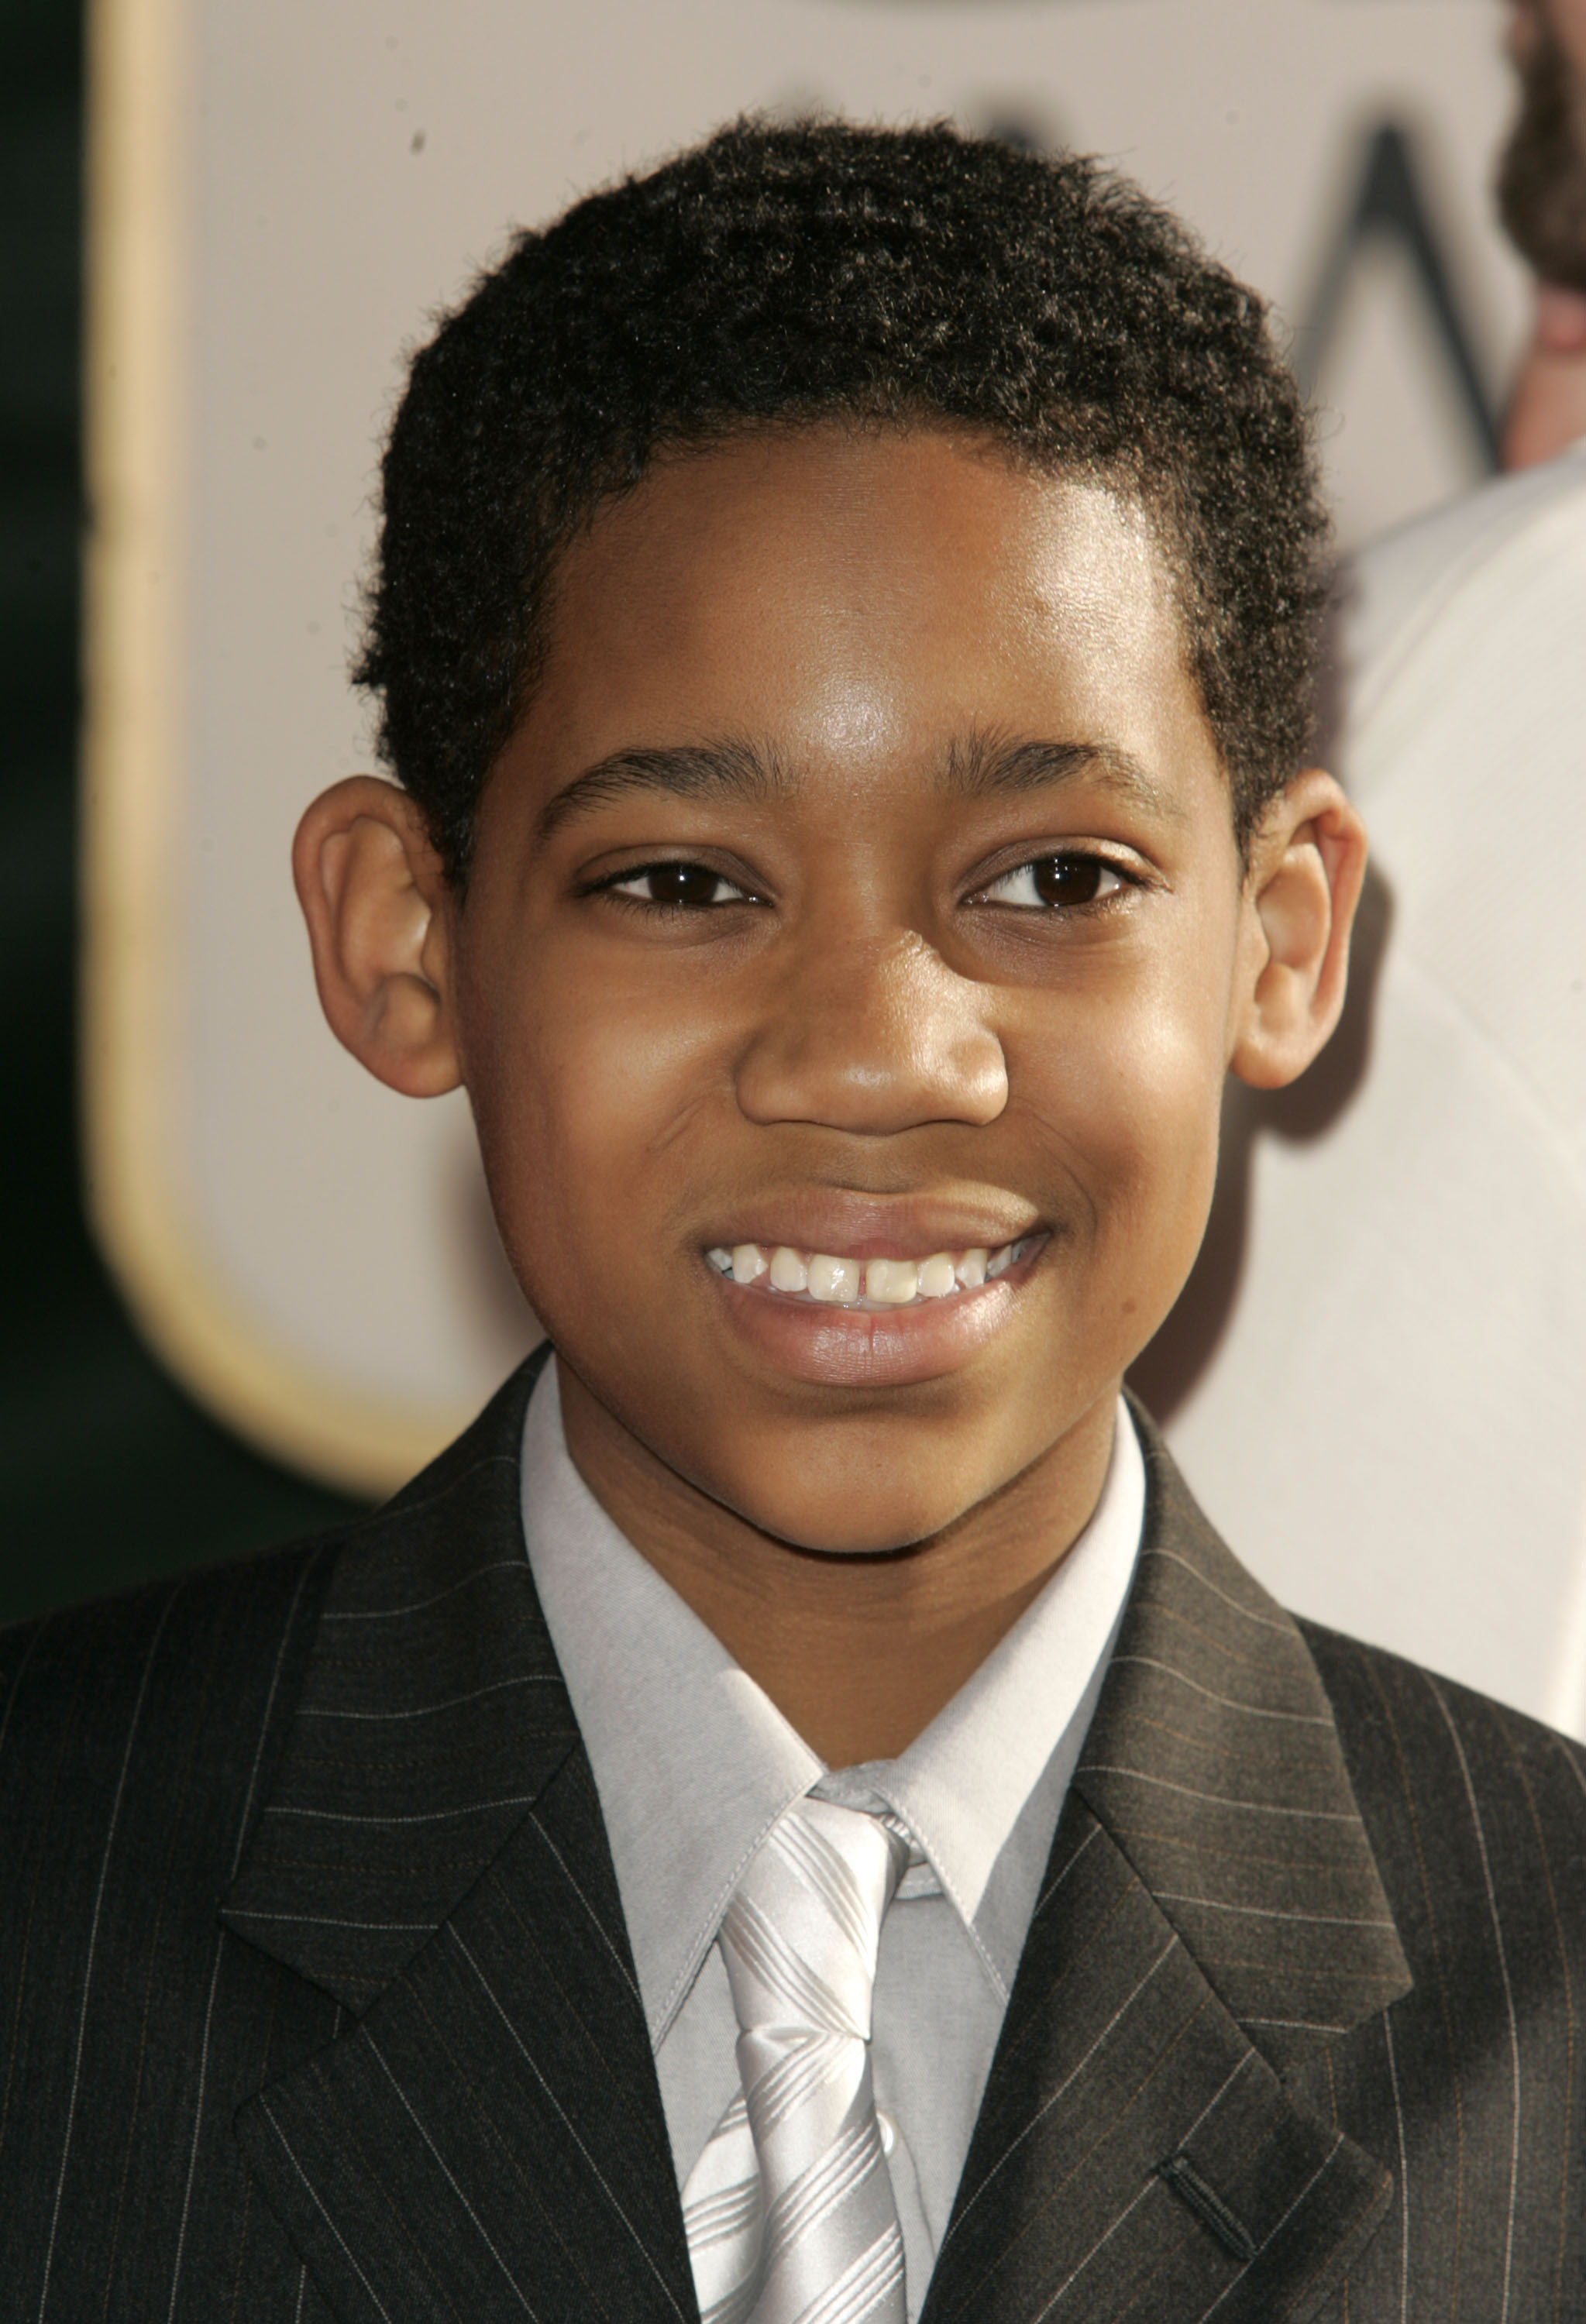 A pre-teen Tyler smiles at a red carpet event. Tyler is wearing a suit and tie